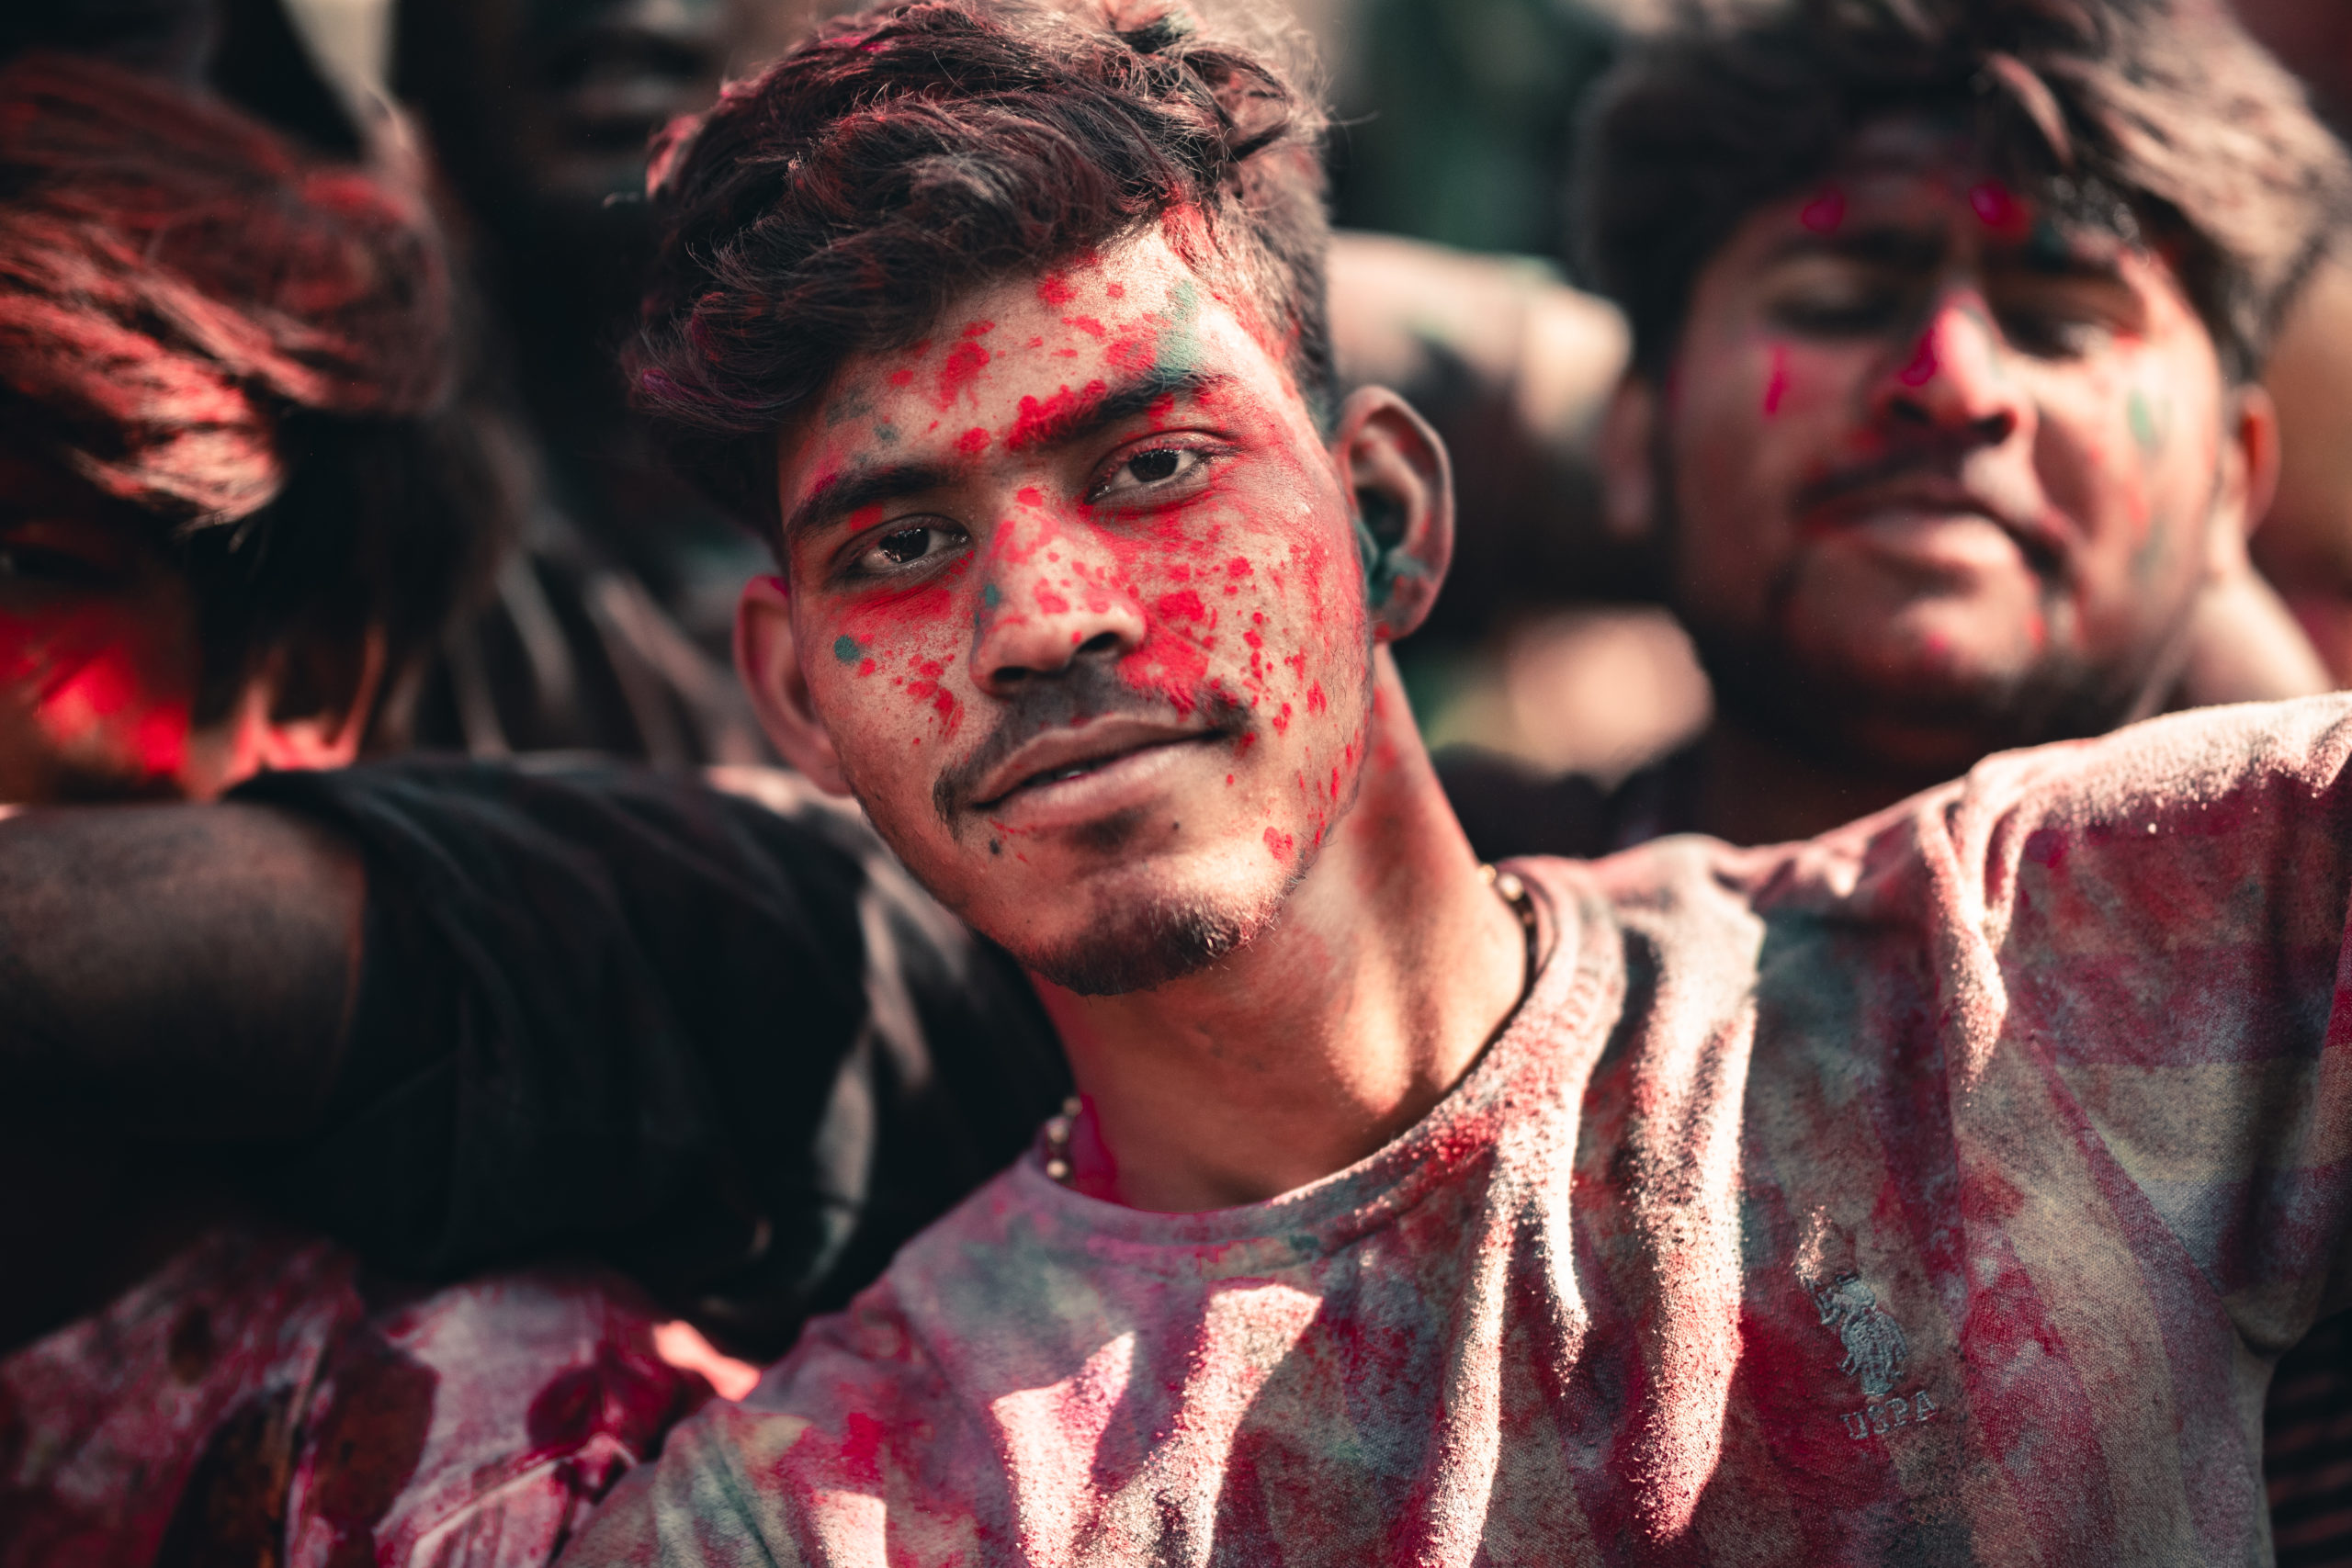 Street photography of a man celebrating the Holi Festival in a temple in Gokul, India. The man has colorful holi powder all over his face and shirt